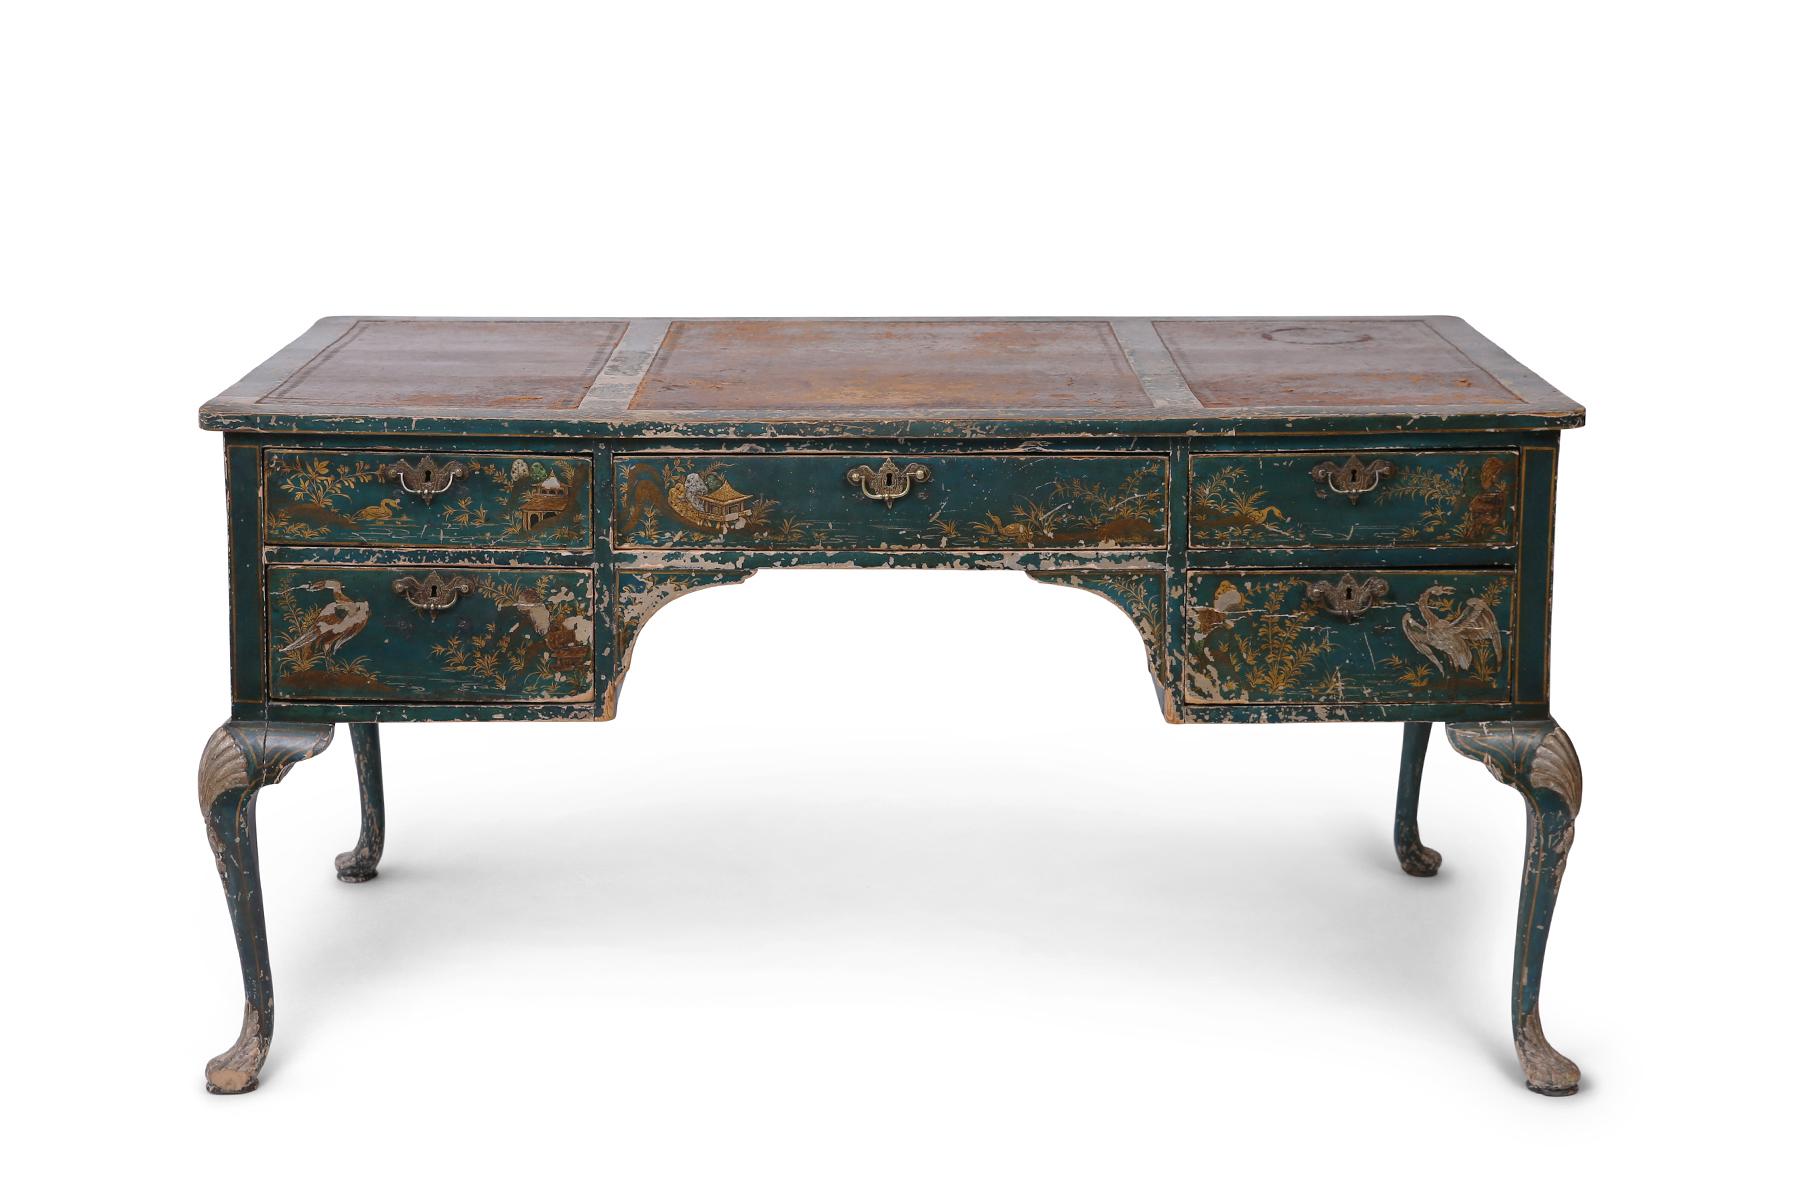 An early 20th century inverted breakfront green/blue-tinted writing desk in the Queen Anne style with painted gold/ochre pagodas, foliage and bird motifs. The desktop has a worn, patina-ed brown leather that gives the piece even more rich